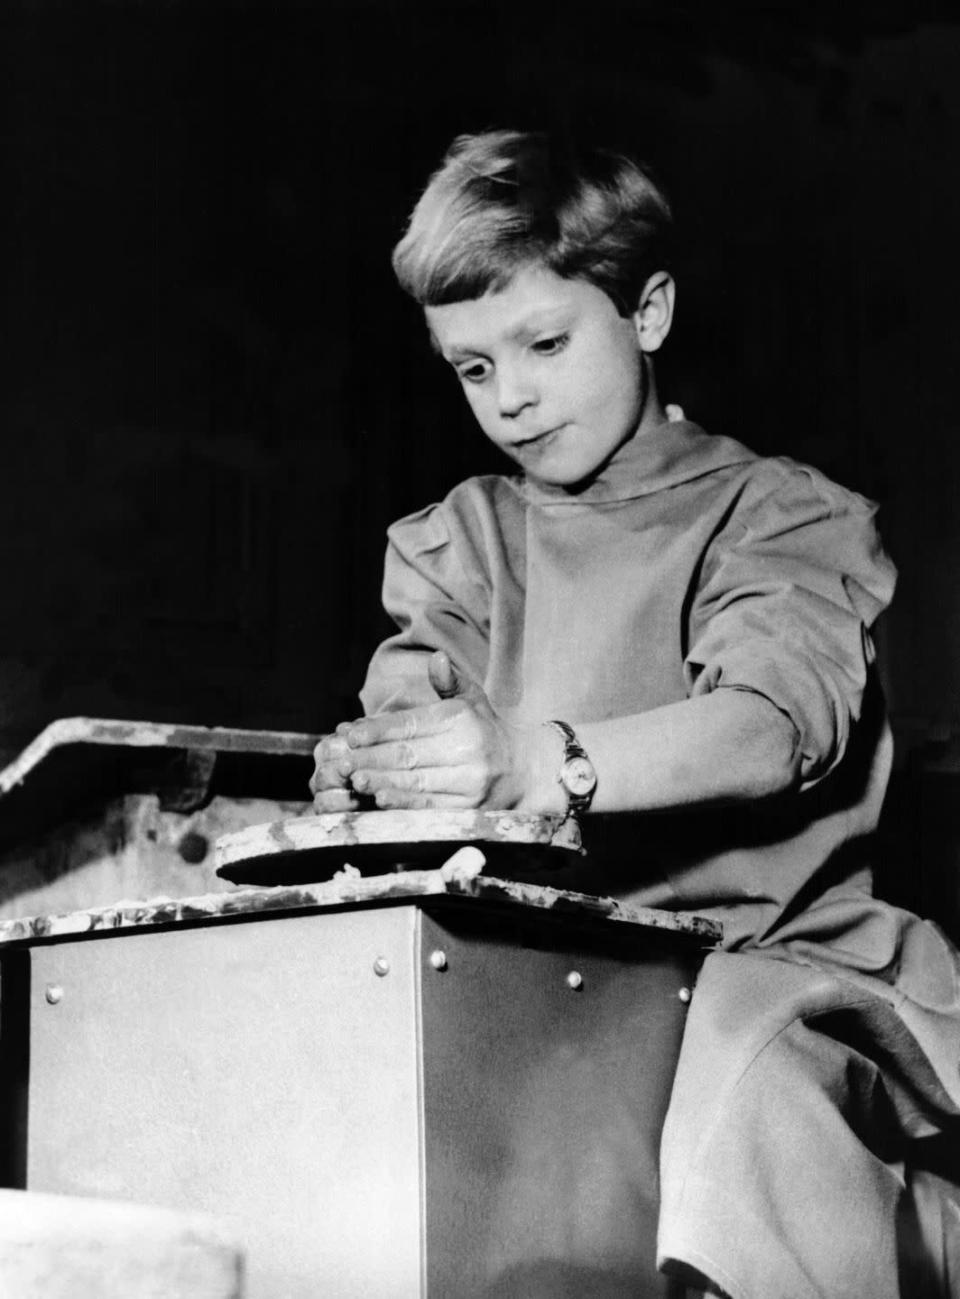 <p>Prince Carl at the pottery wheel as a child.</p>